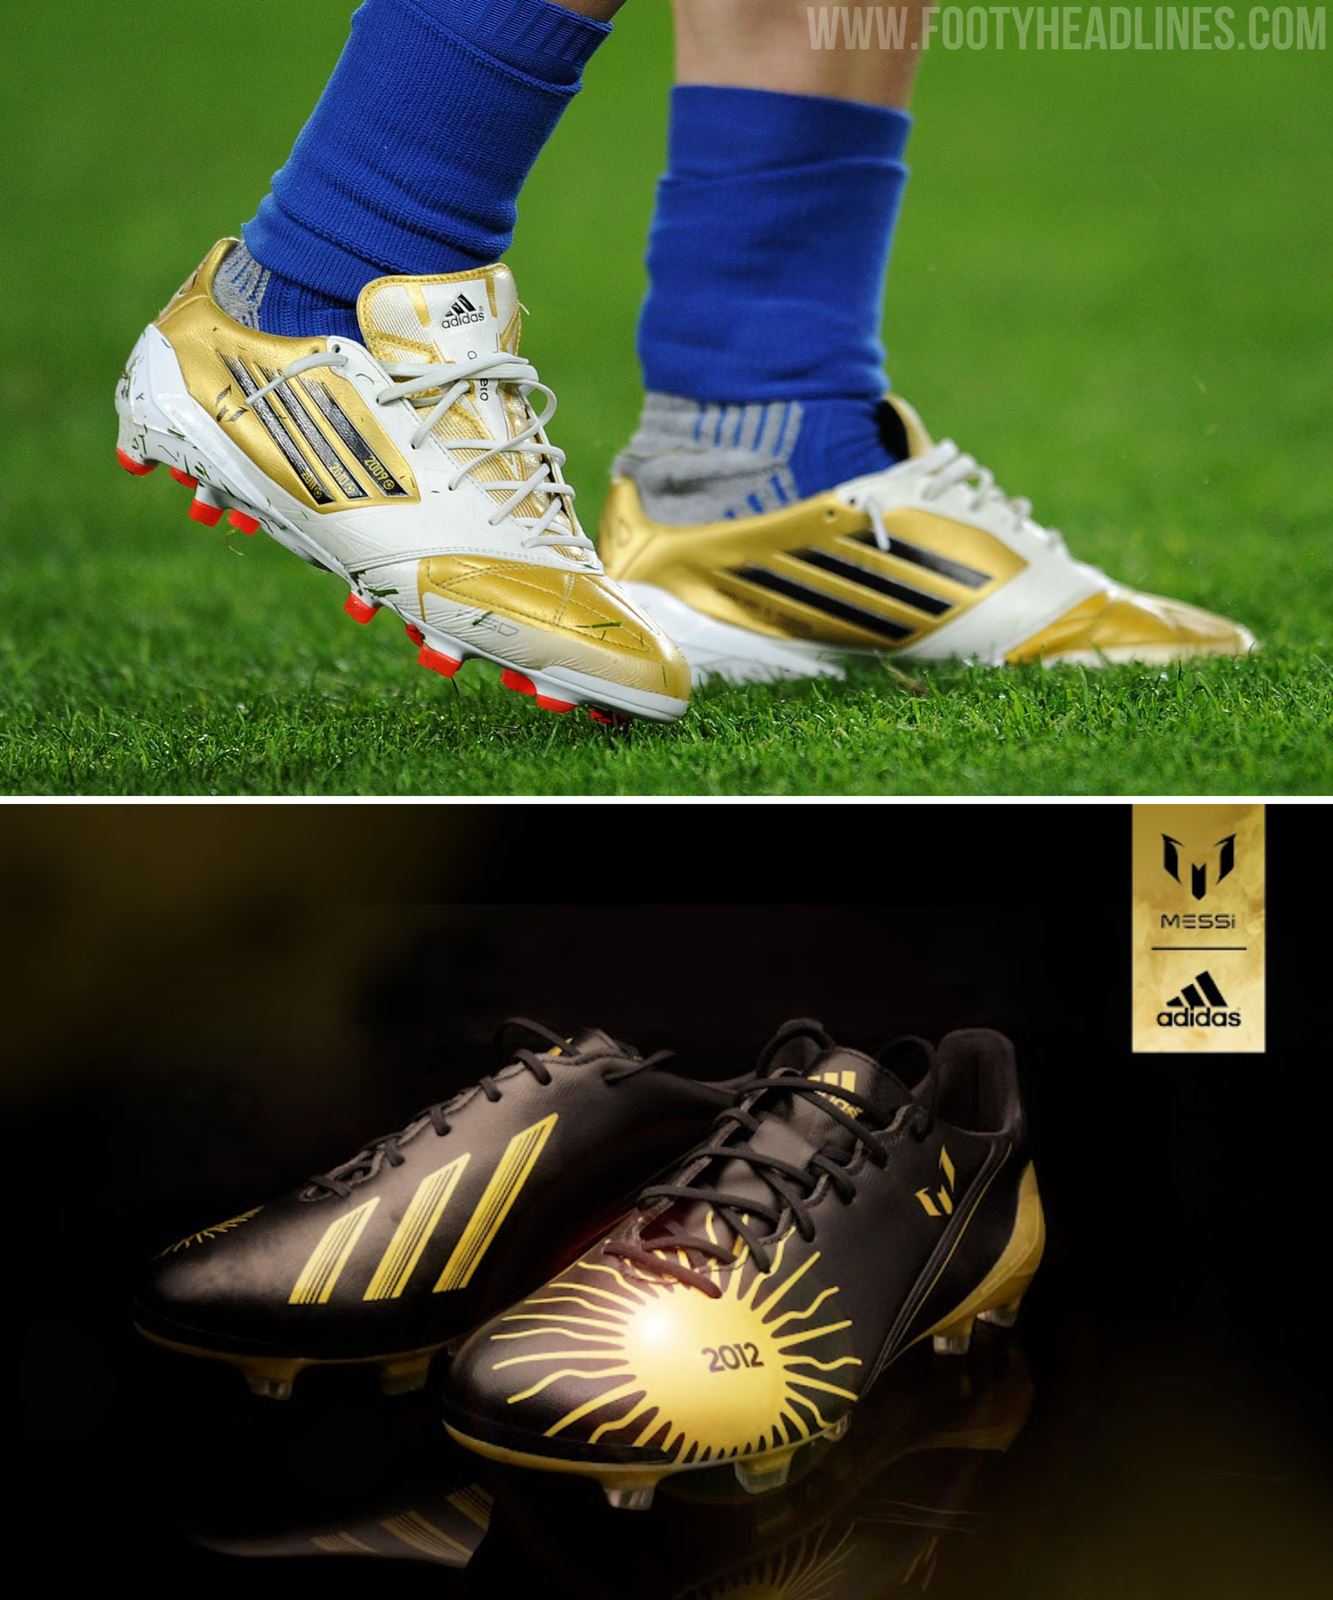 Adidas Release Special Messi 2023 FIFA Player of the Year - Footy Headlines